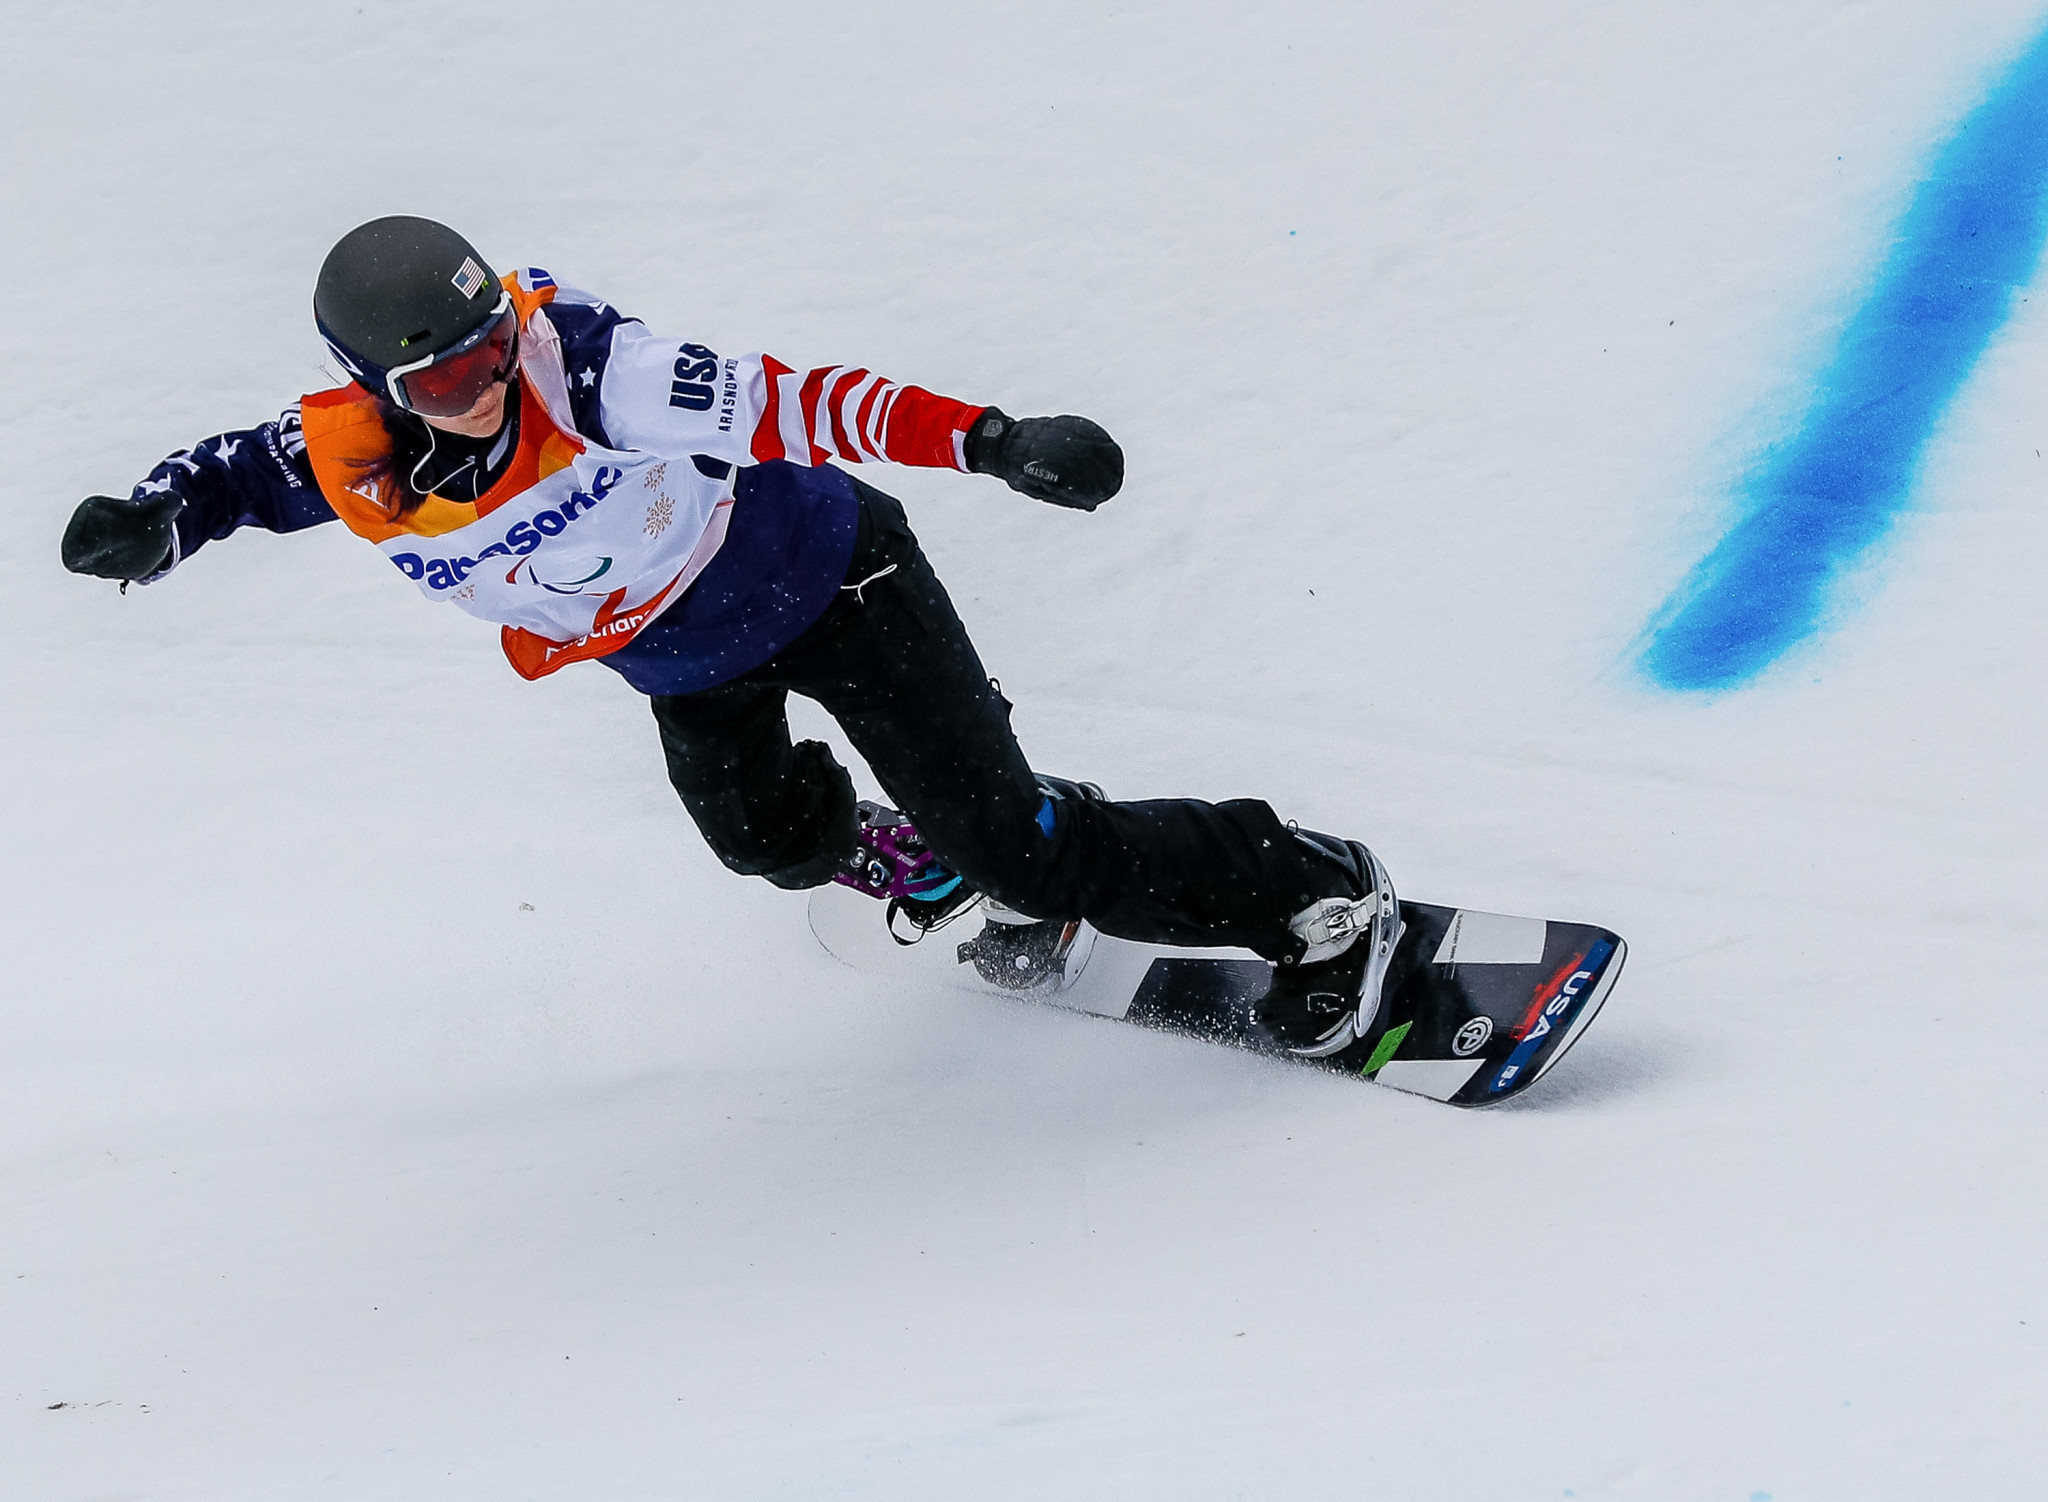 American Brenna Huckaby won two golds at Pyeongchang 2018 in the women's LL1 competitions at Beijing 2022, but the classification does not feature ©Getty Images